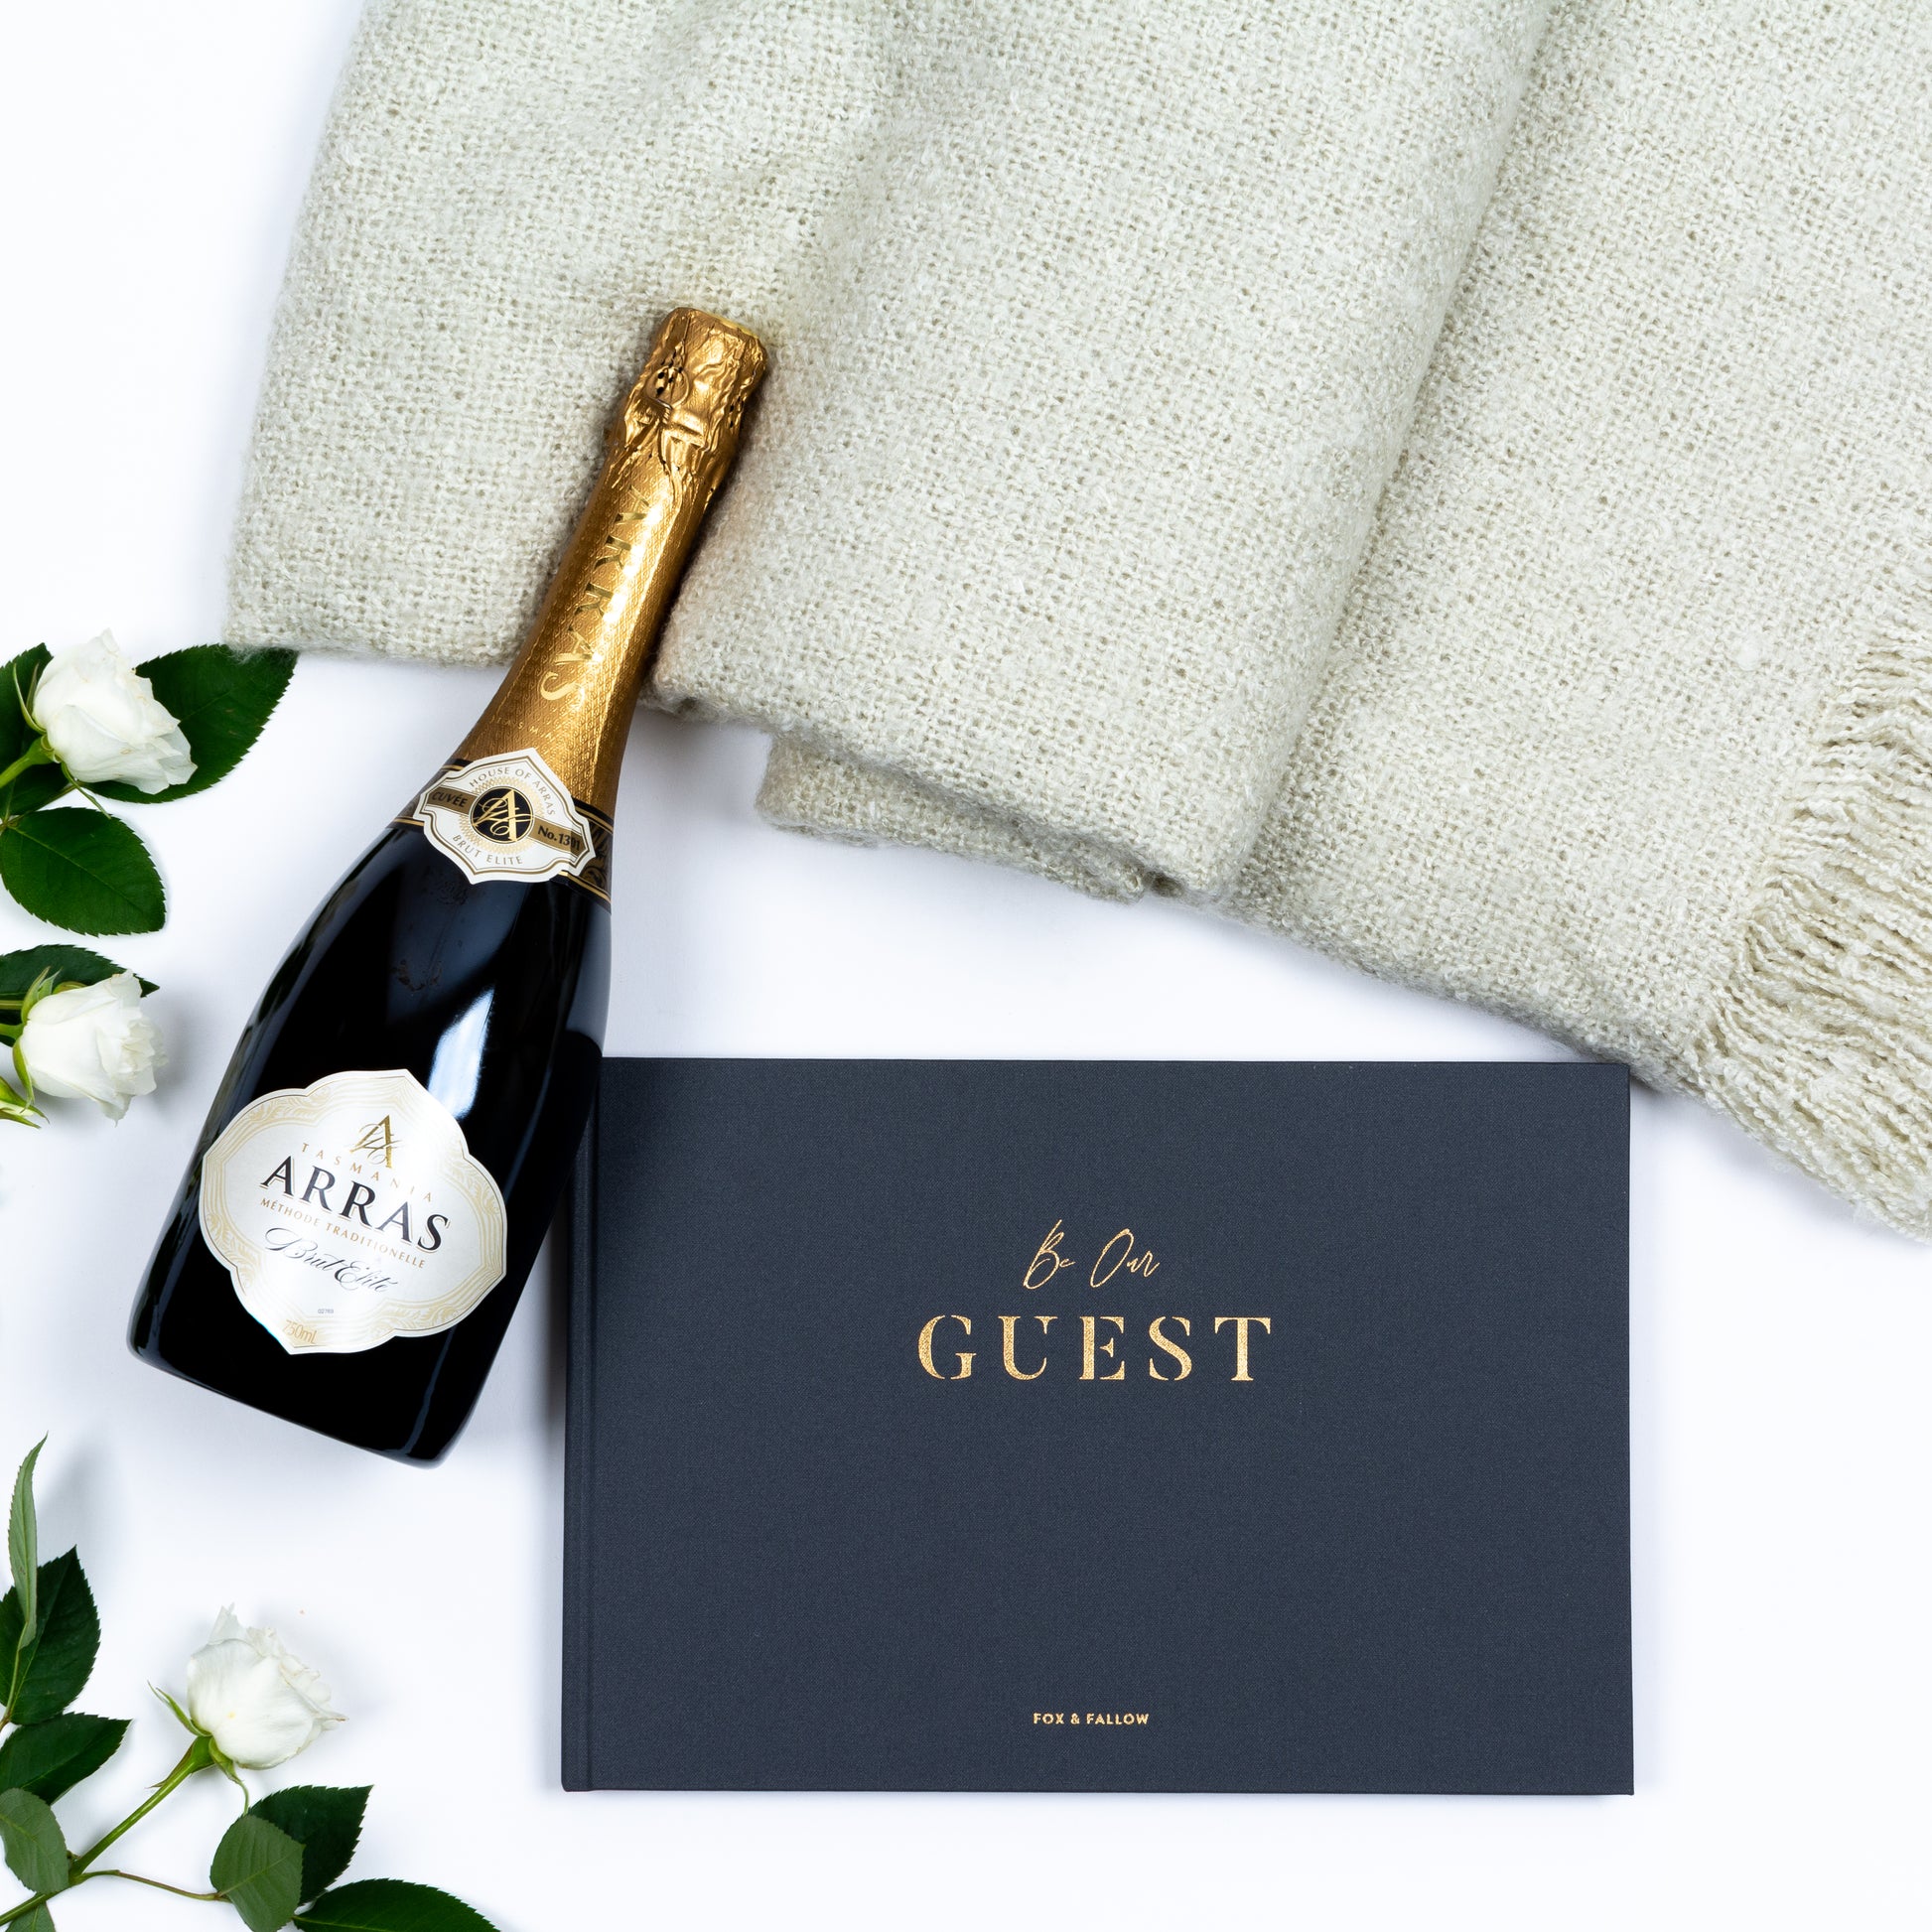 Products featured out of gift box are brut cuvee, guest book, soft throw.